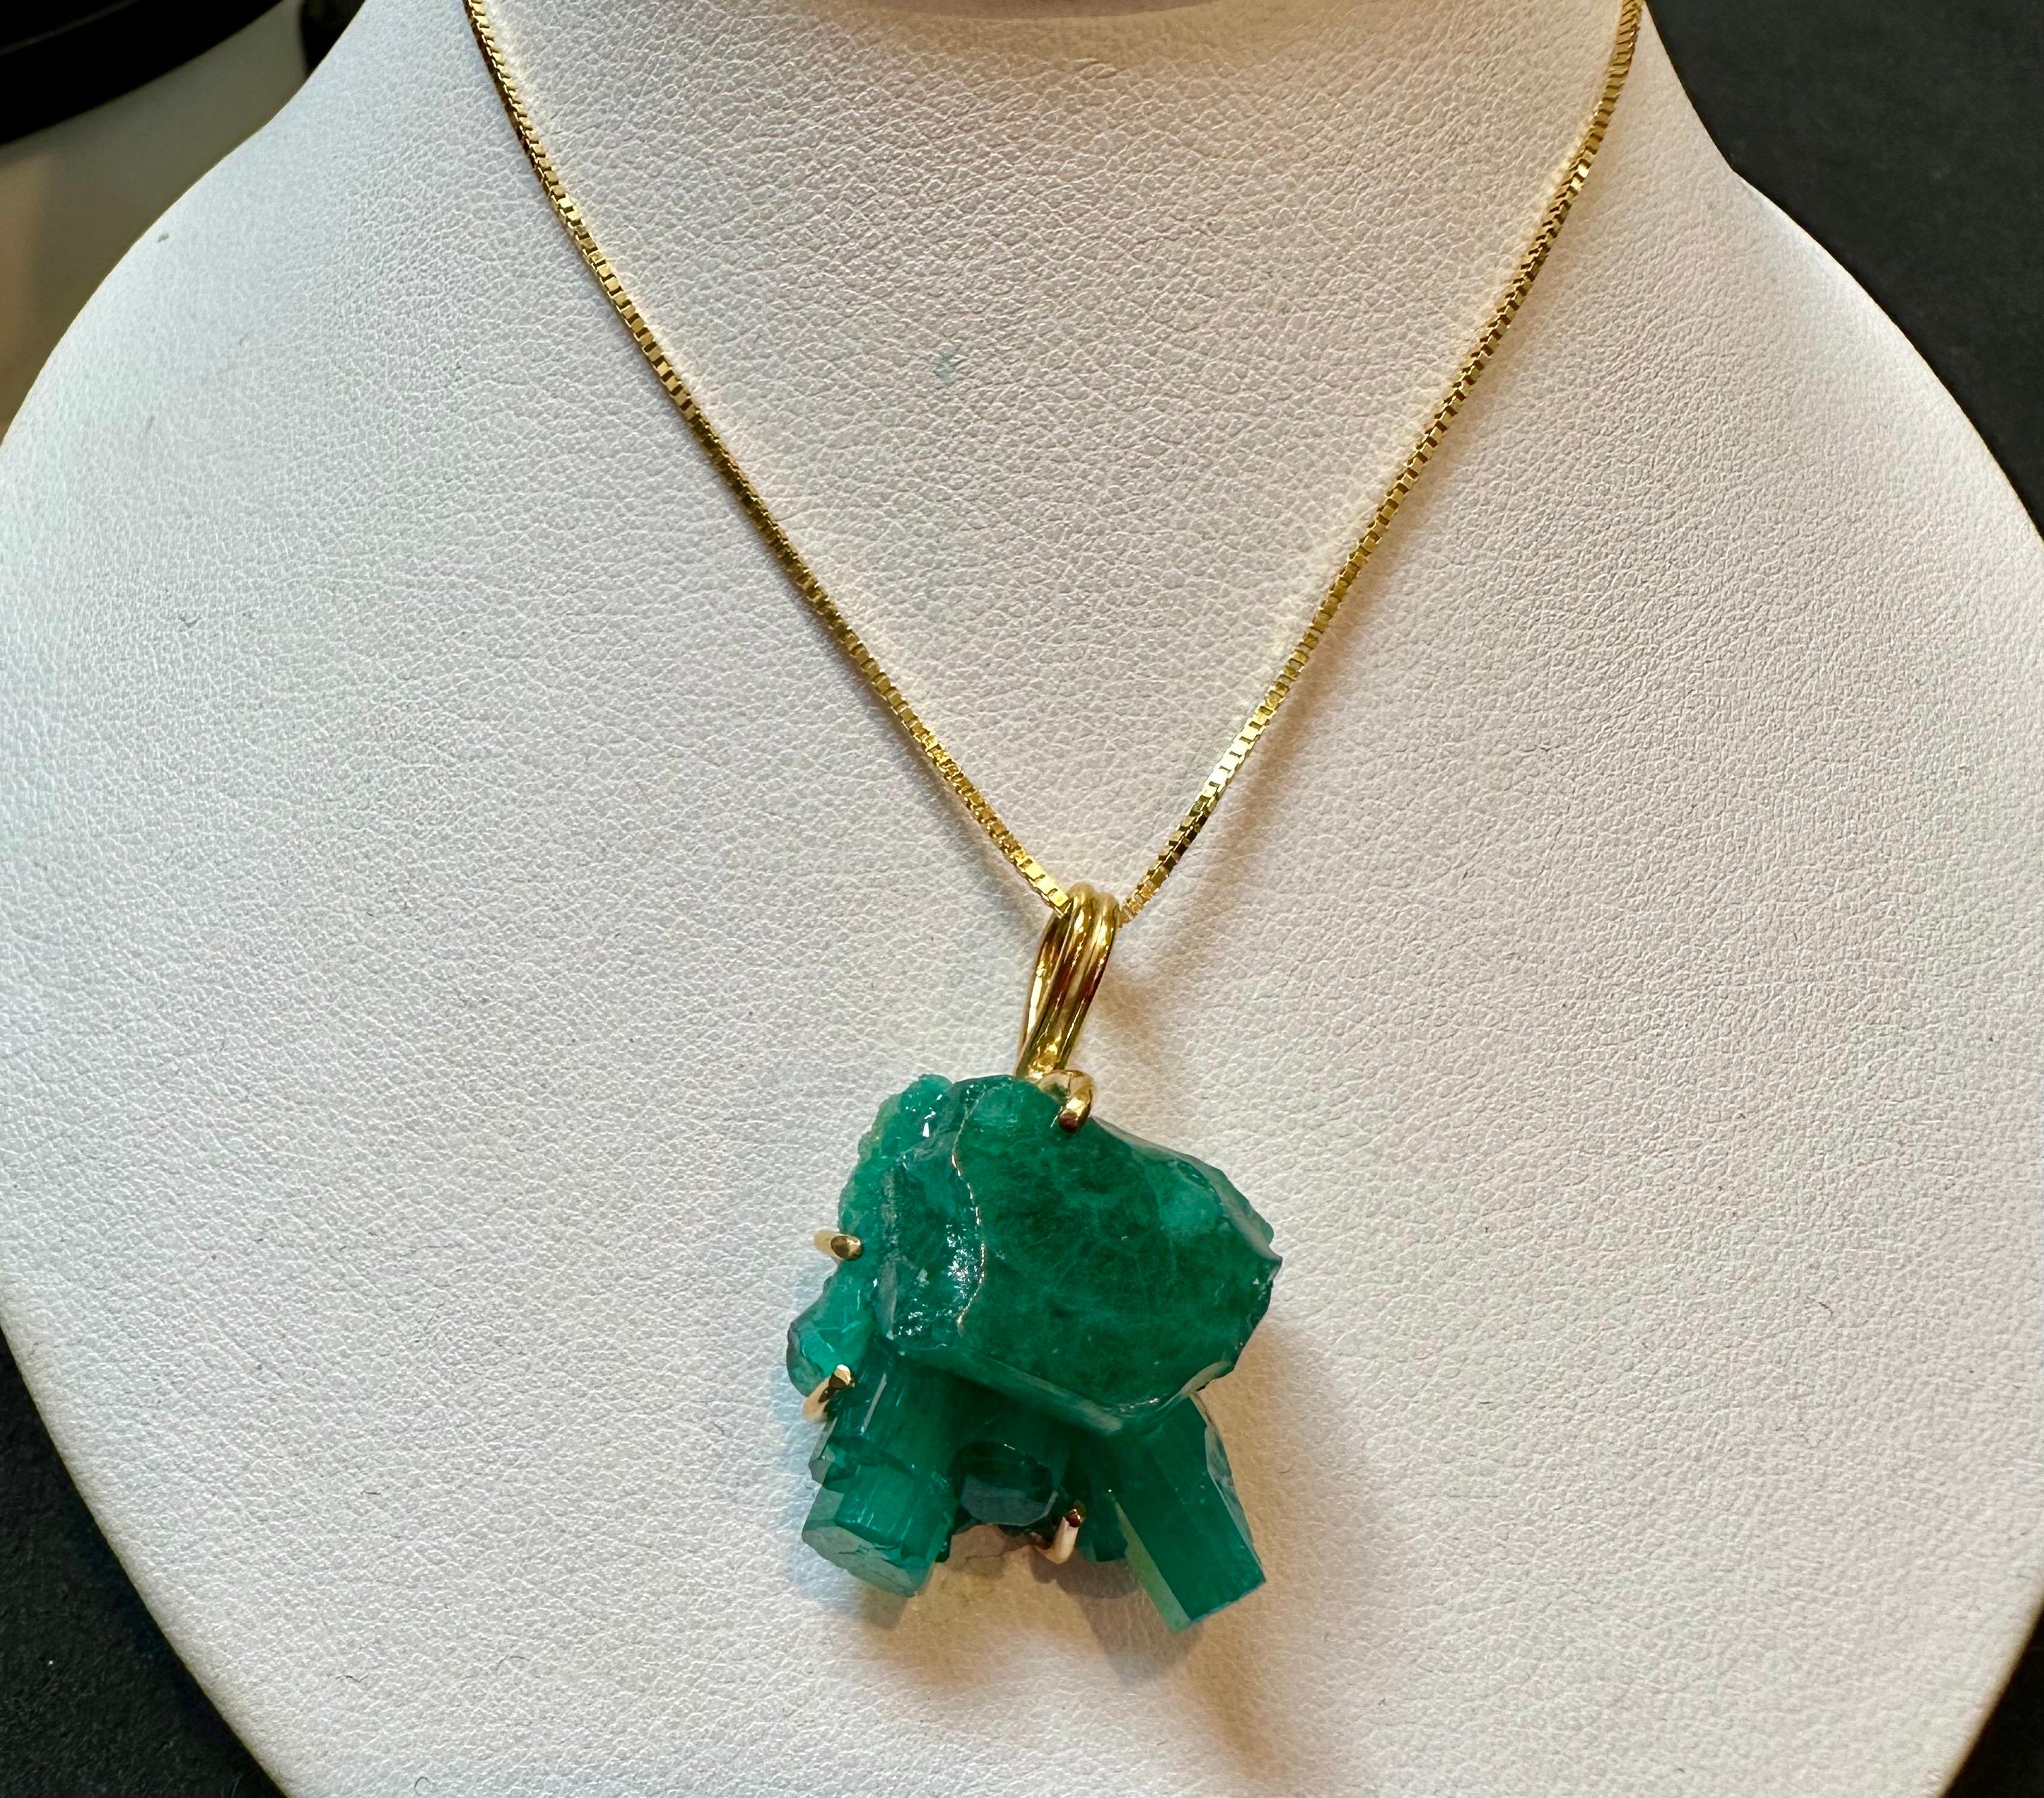 This Colombian Emerald Rough Pendant necklace is a breathtaking statement piece. It showcases a large, extremely fine 25 ct total weight emerald, beautifully set in 18 karat Yellow Gold. The pendant dangles from a scintillating bale and is